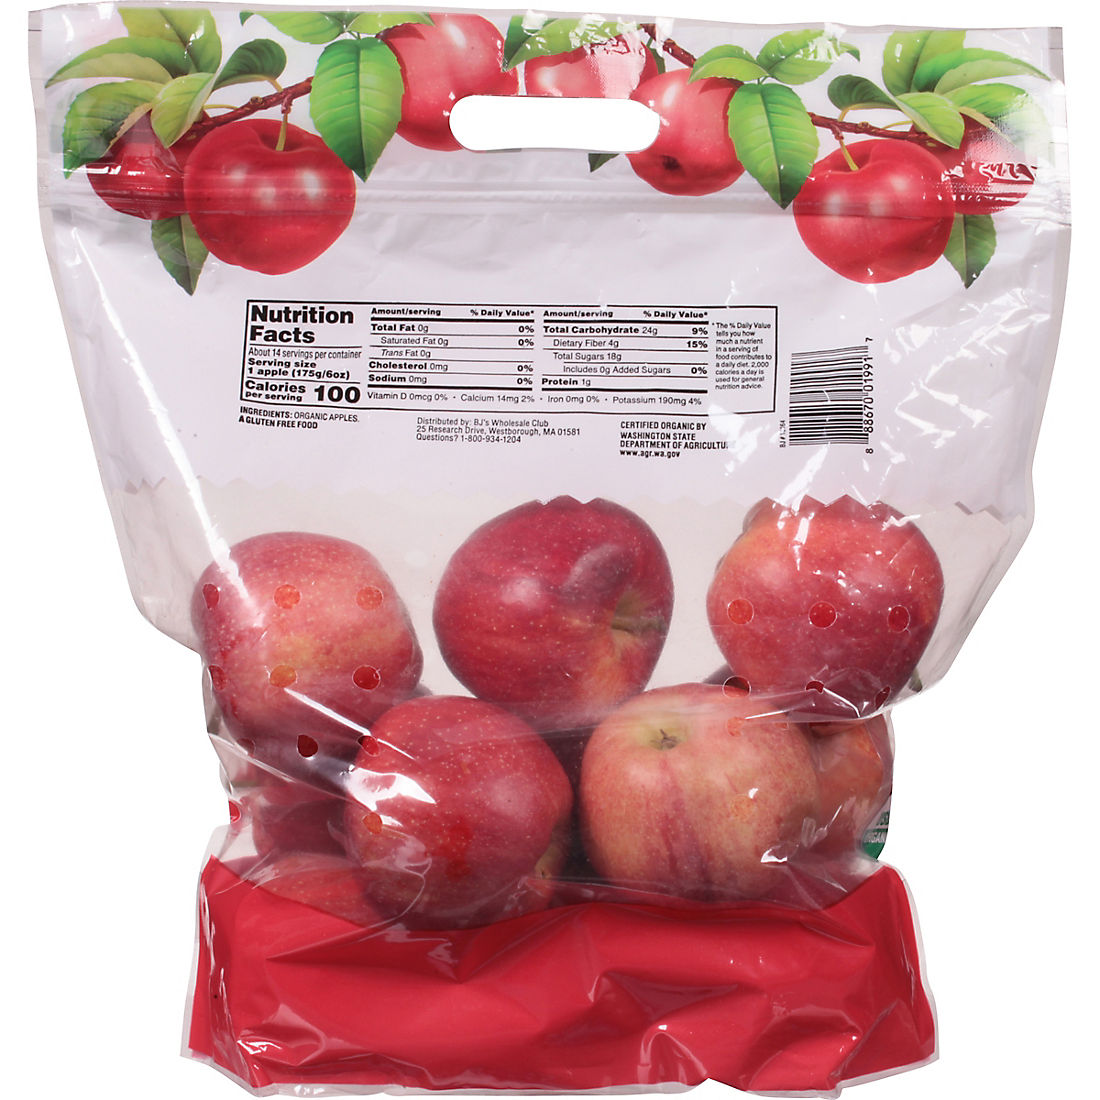 Organic Gala Apples Bag – Red Owl Delivery